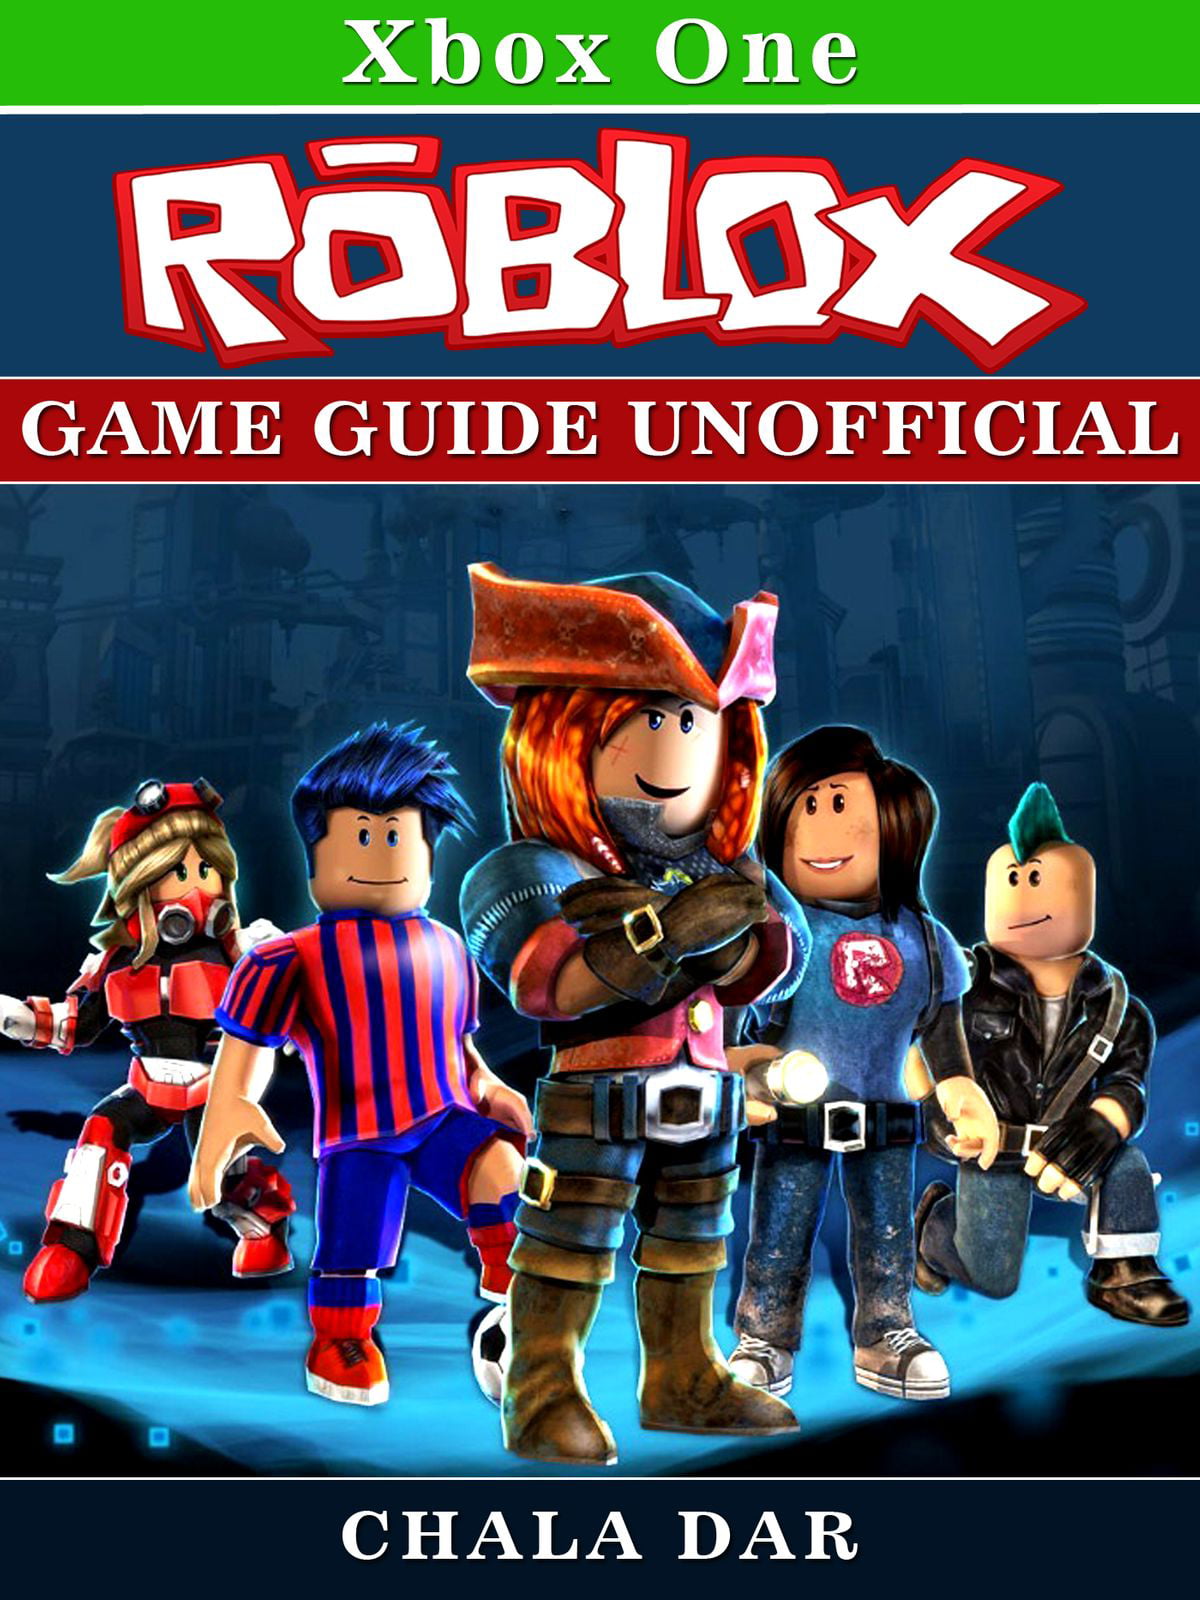 Roblox Xbox One Game Guide Unofficial Ebook Walmart Com Walmart Com - roblox cheat codes for xbox one